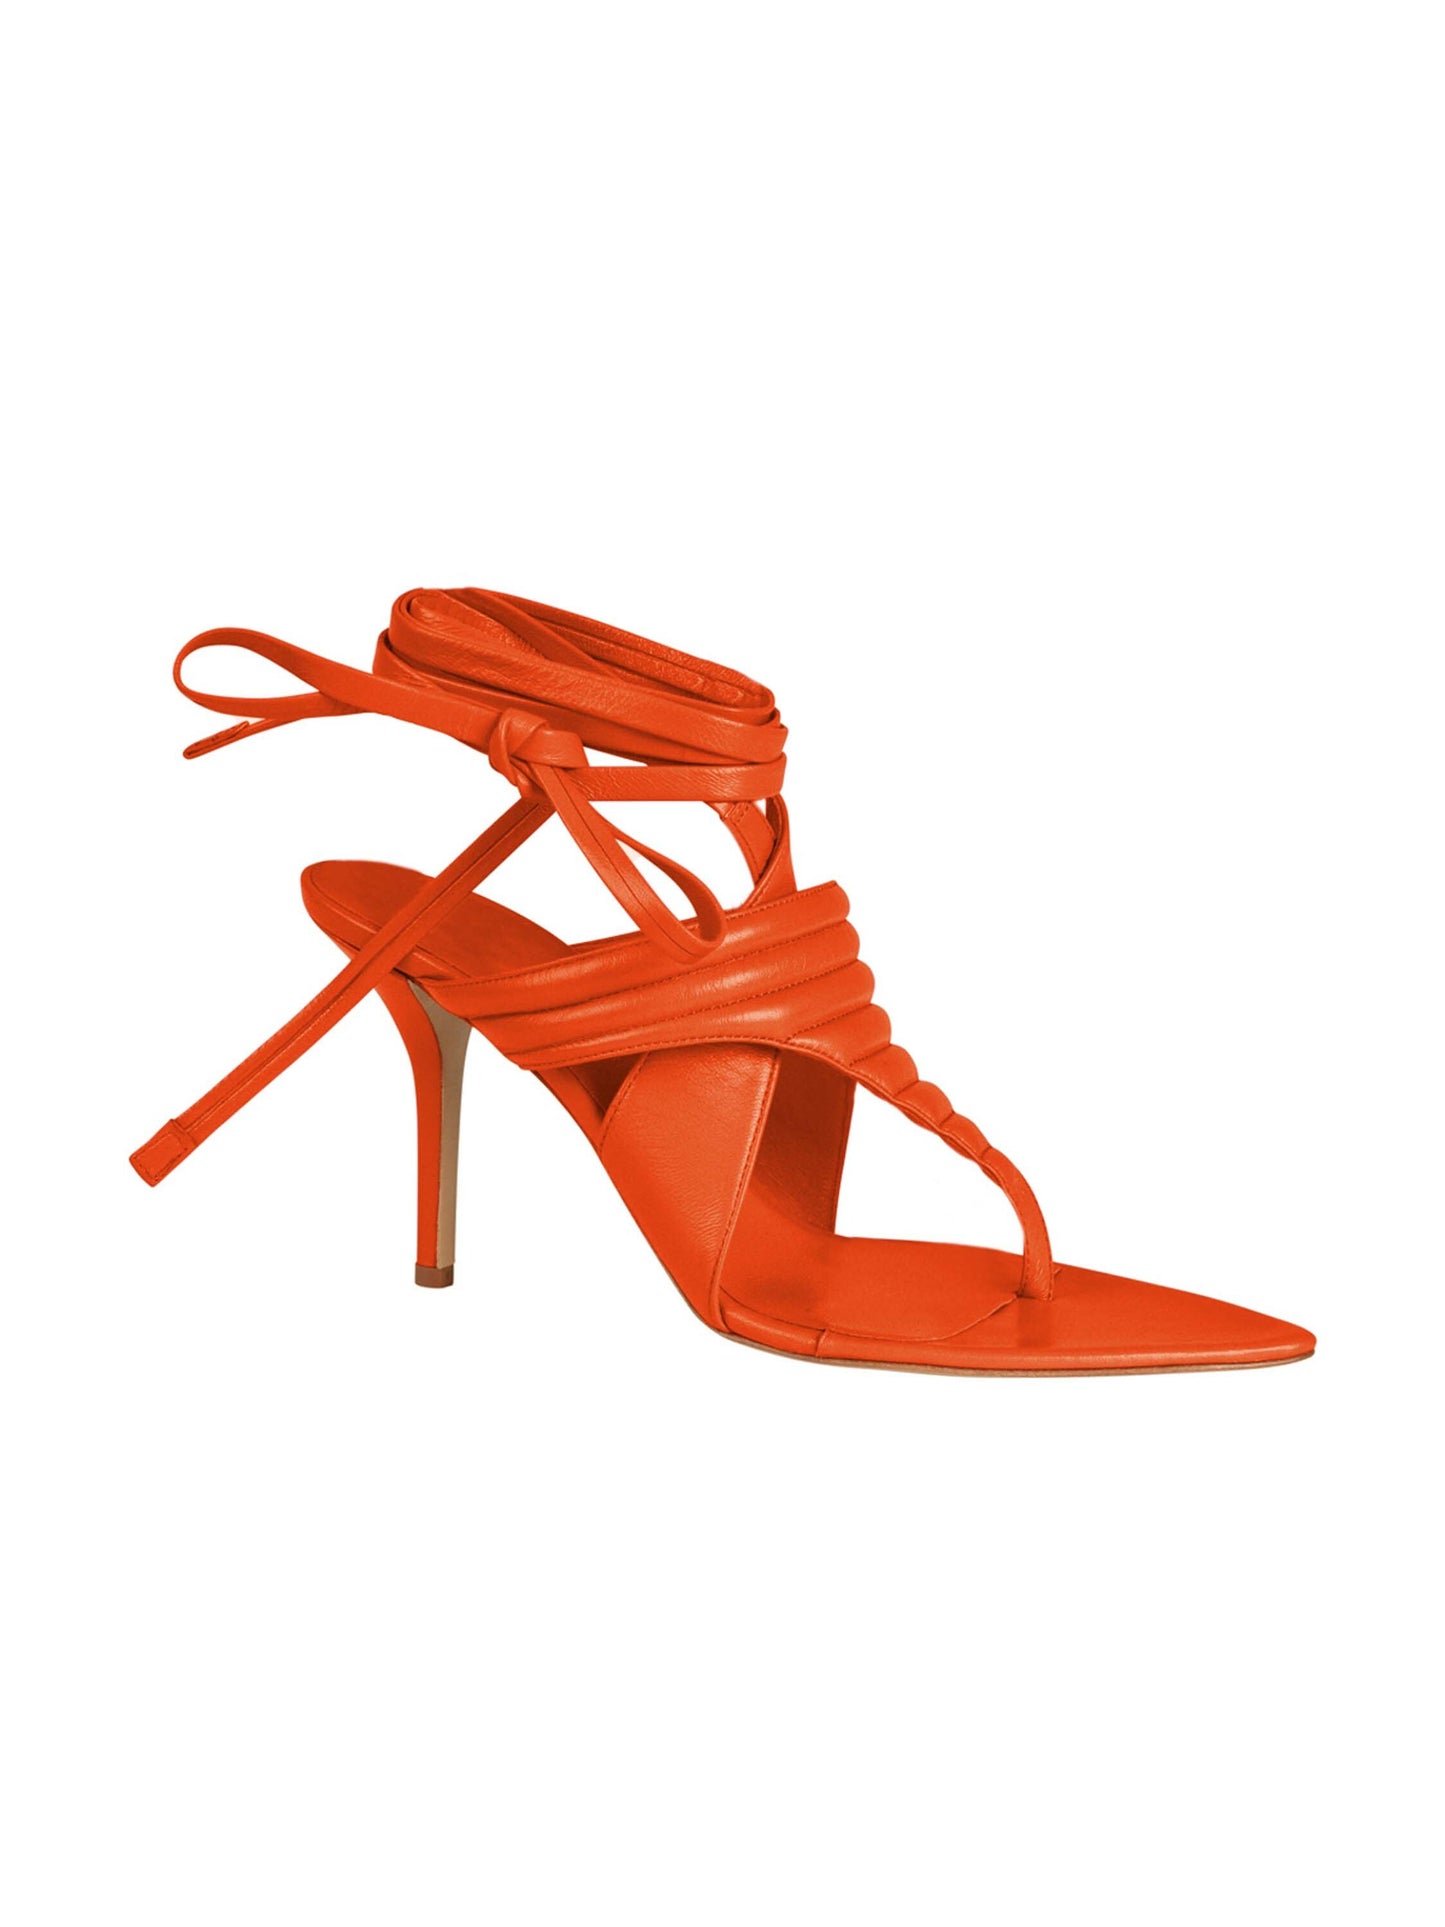 Dalila Heels Orange high-heeled sandal with strappy, wrap-around ankle ties against a white background.